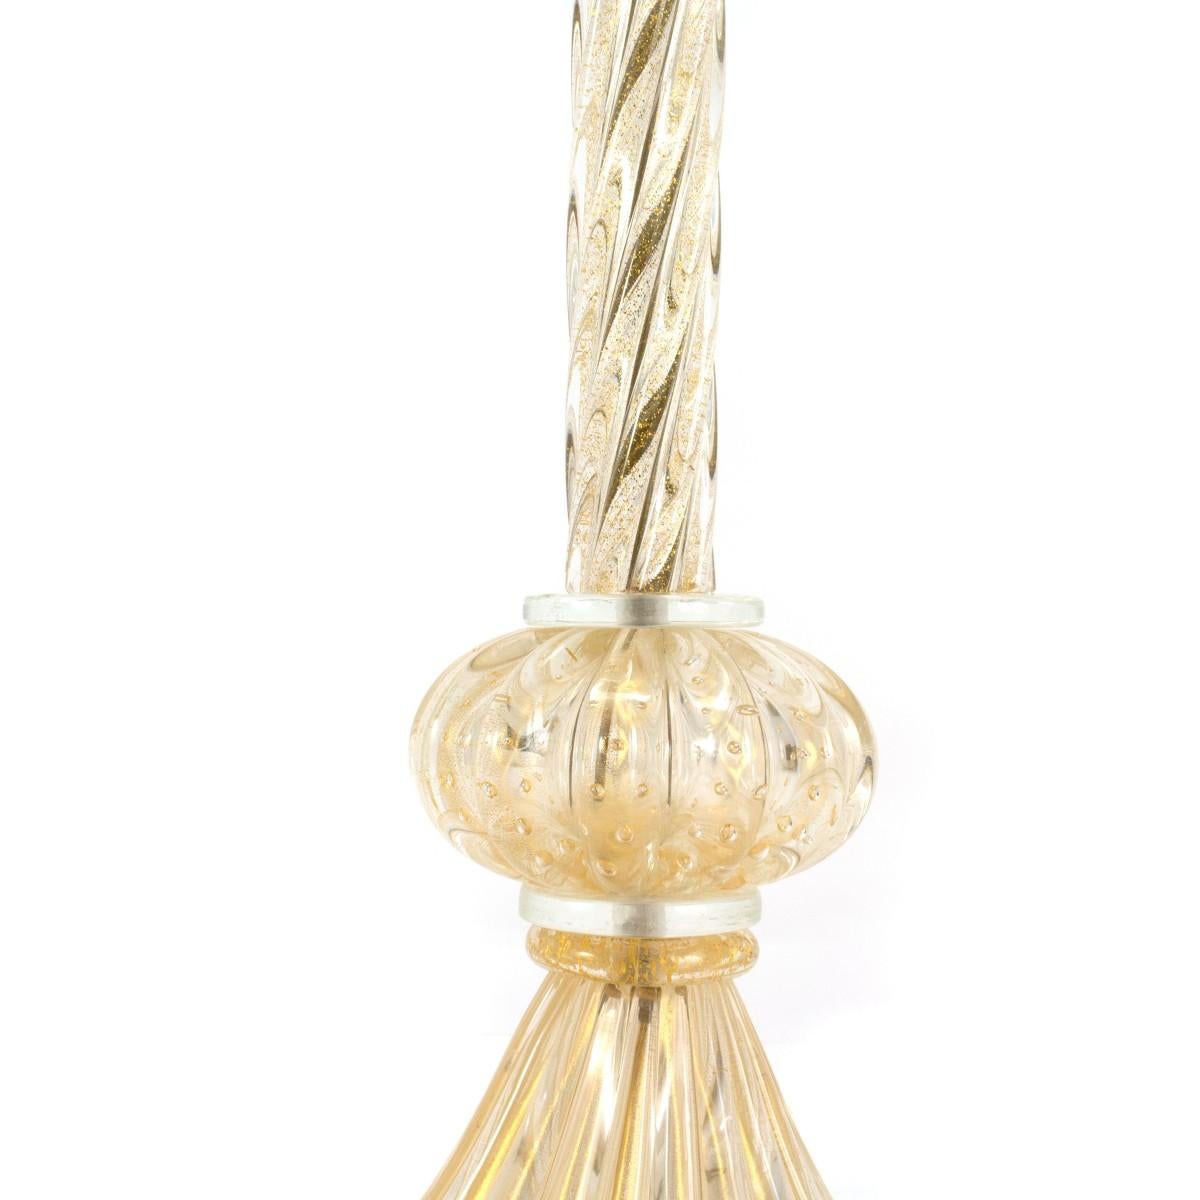 Pair of Murano glass table lamps with gold flecks, Italy, circa 1950. Drum shades included.